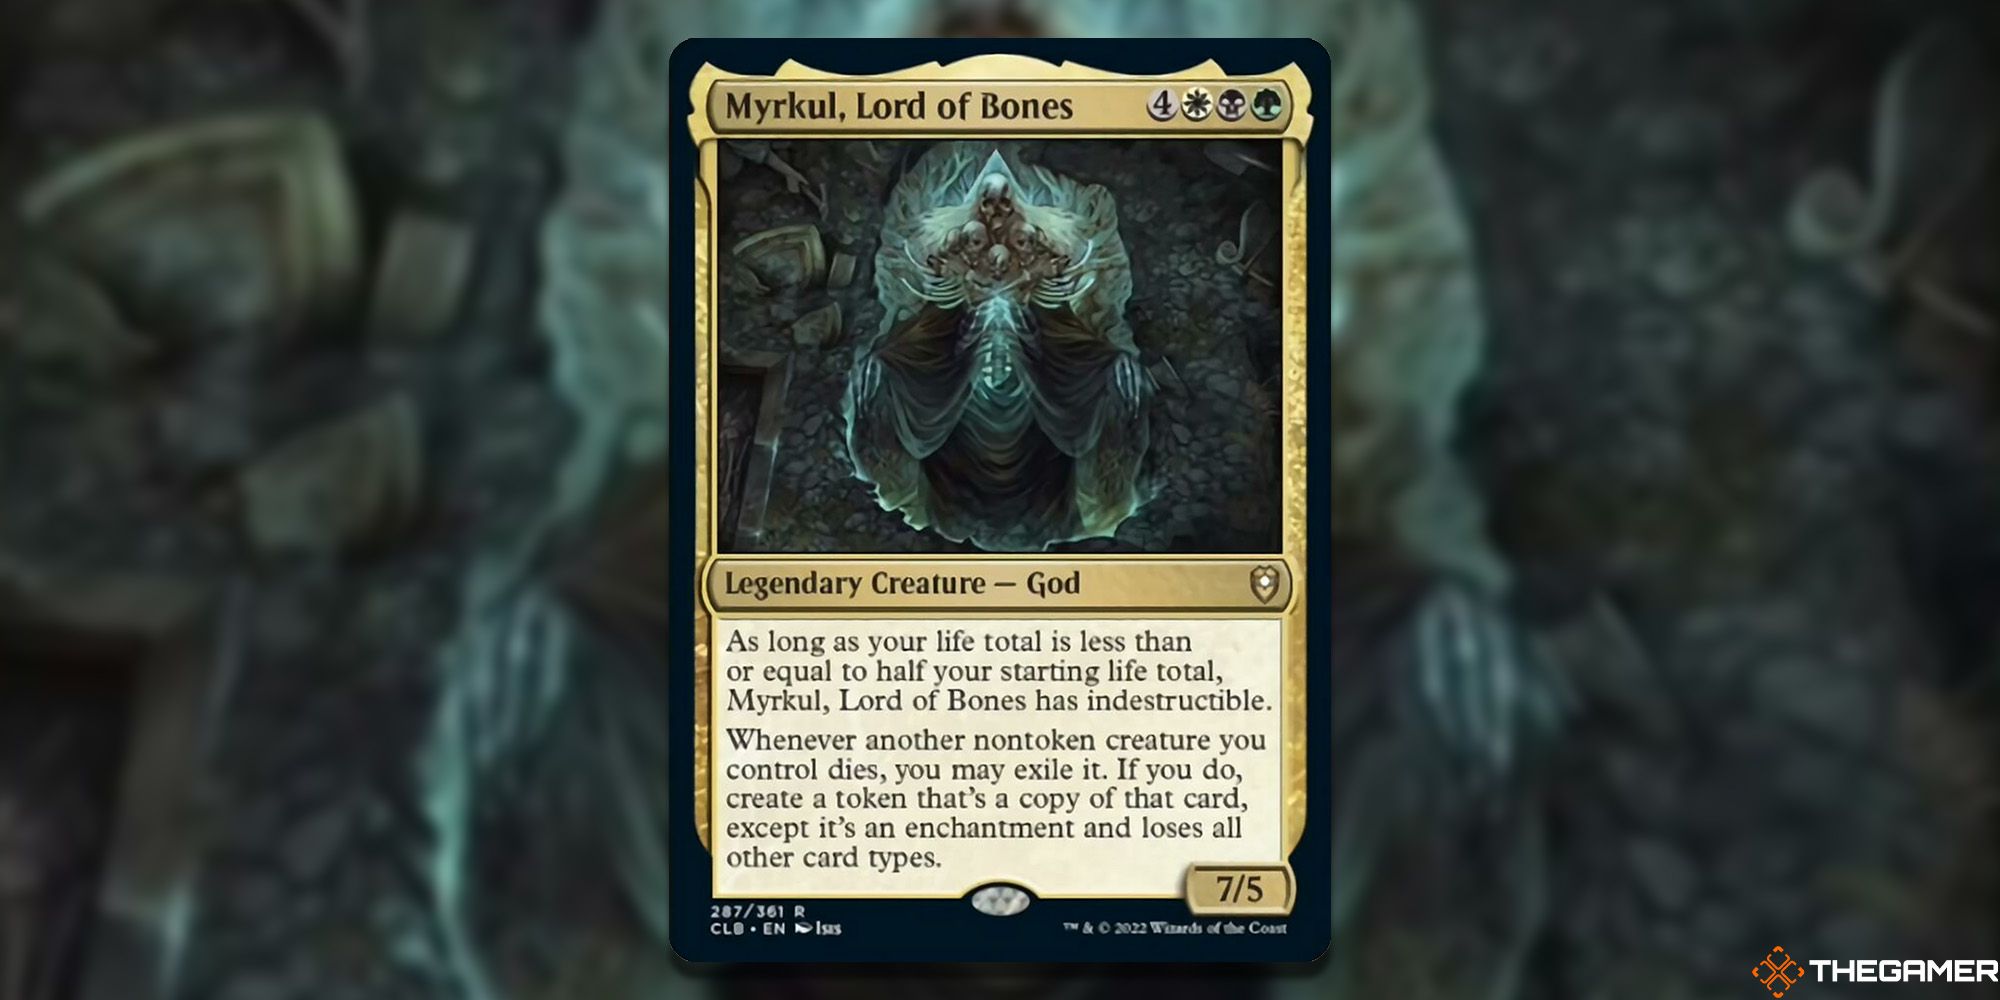 Image of the myrkul, lord of bones card in Magic: The Gathering, with art by Isis